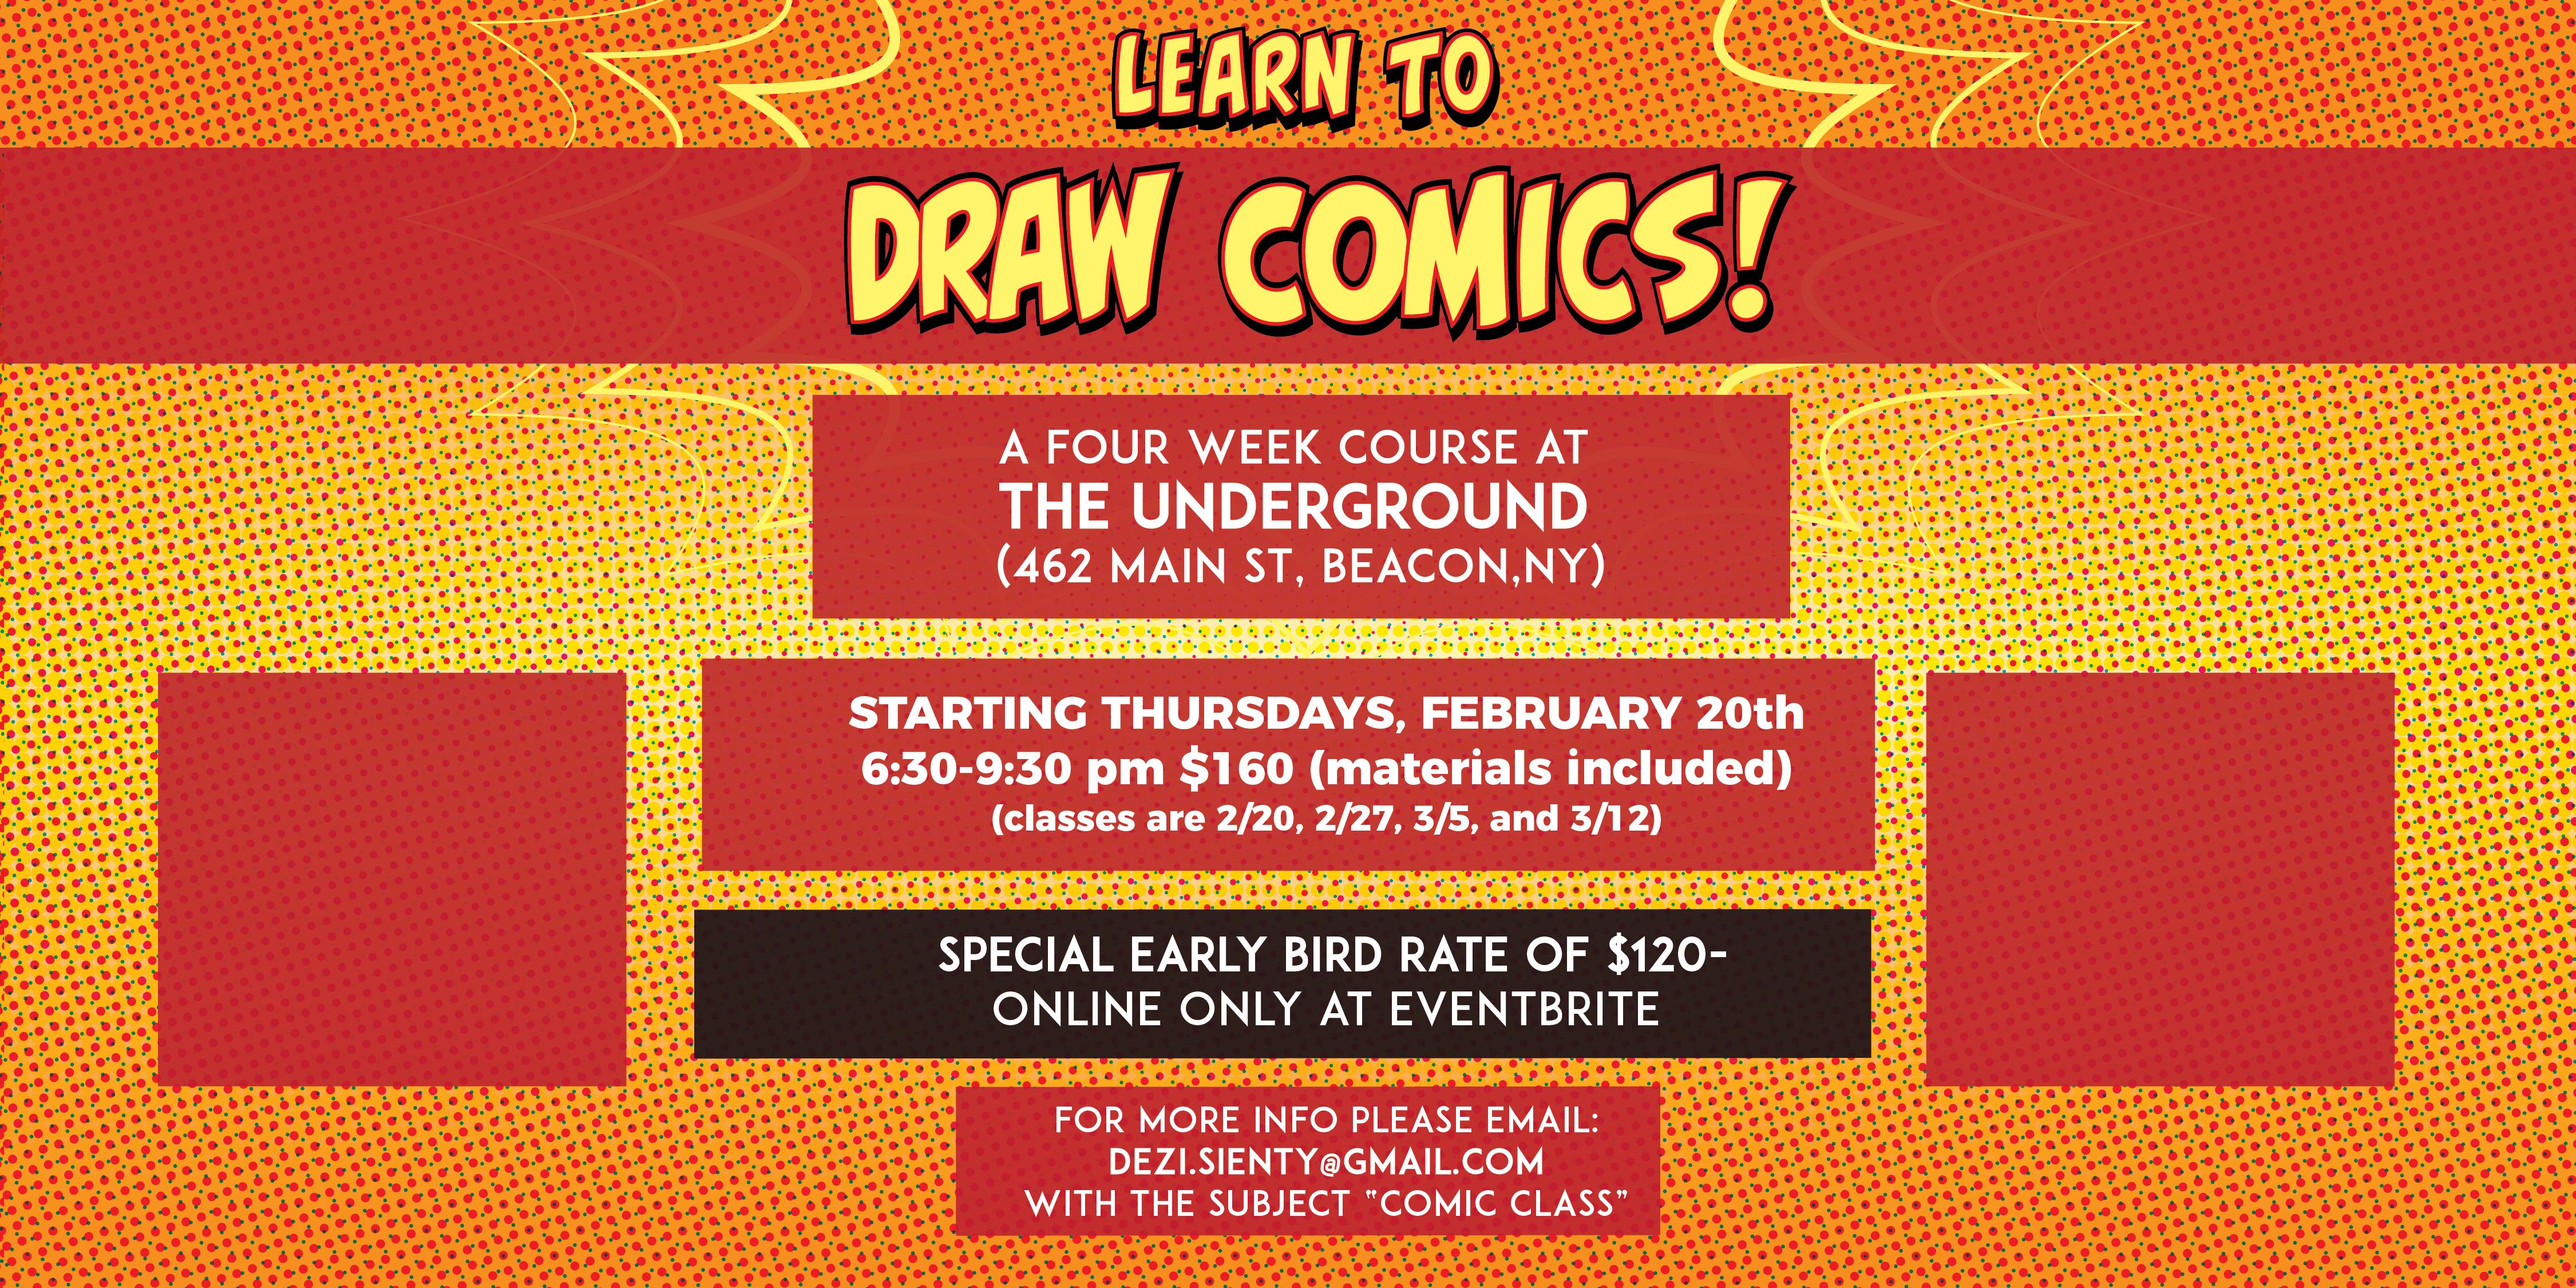 Learn To Draw Comics @ the Underground in Beacon, NY